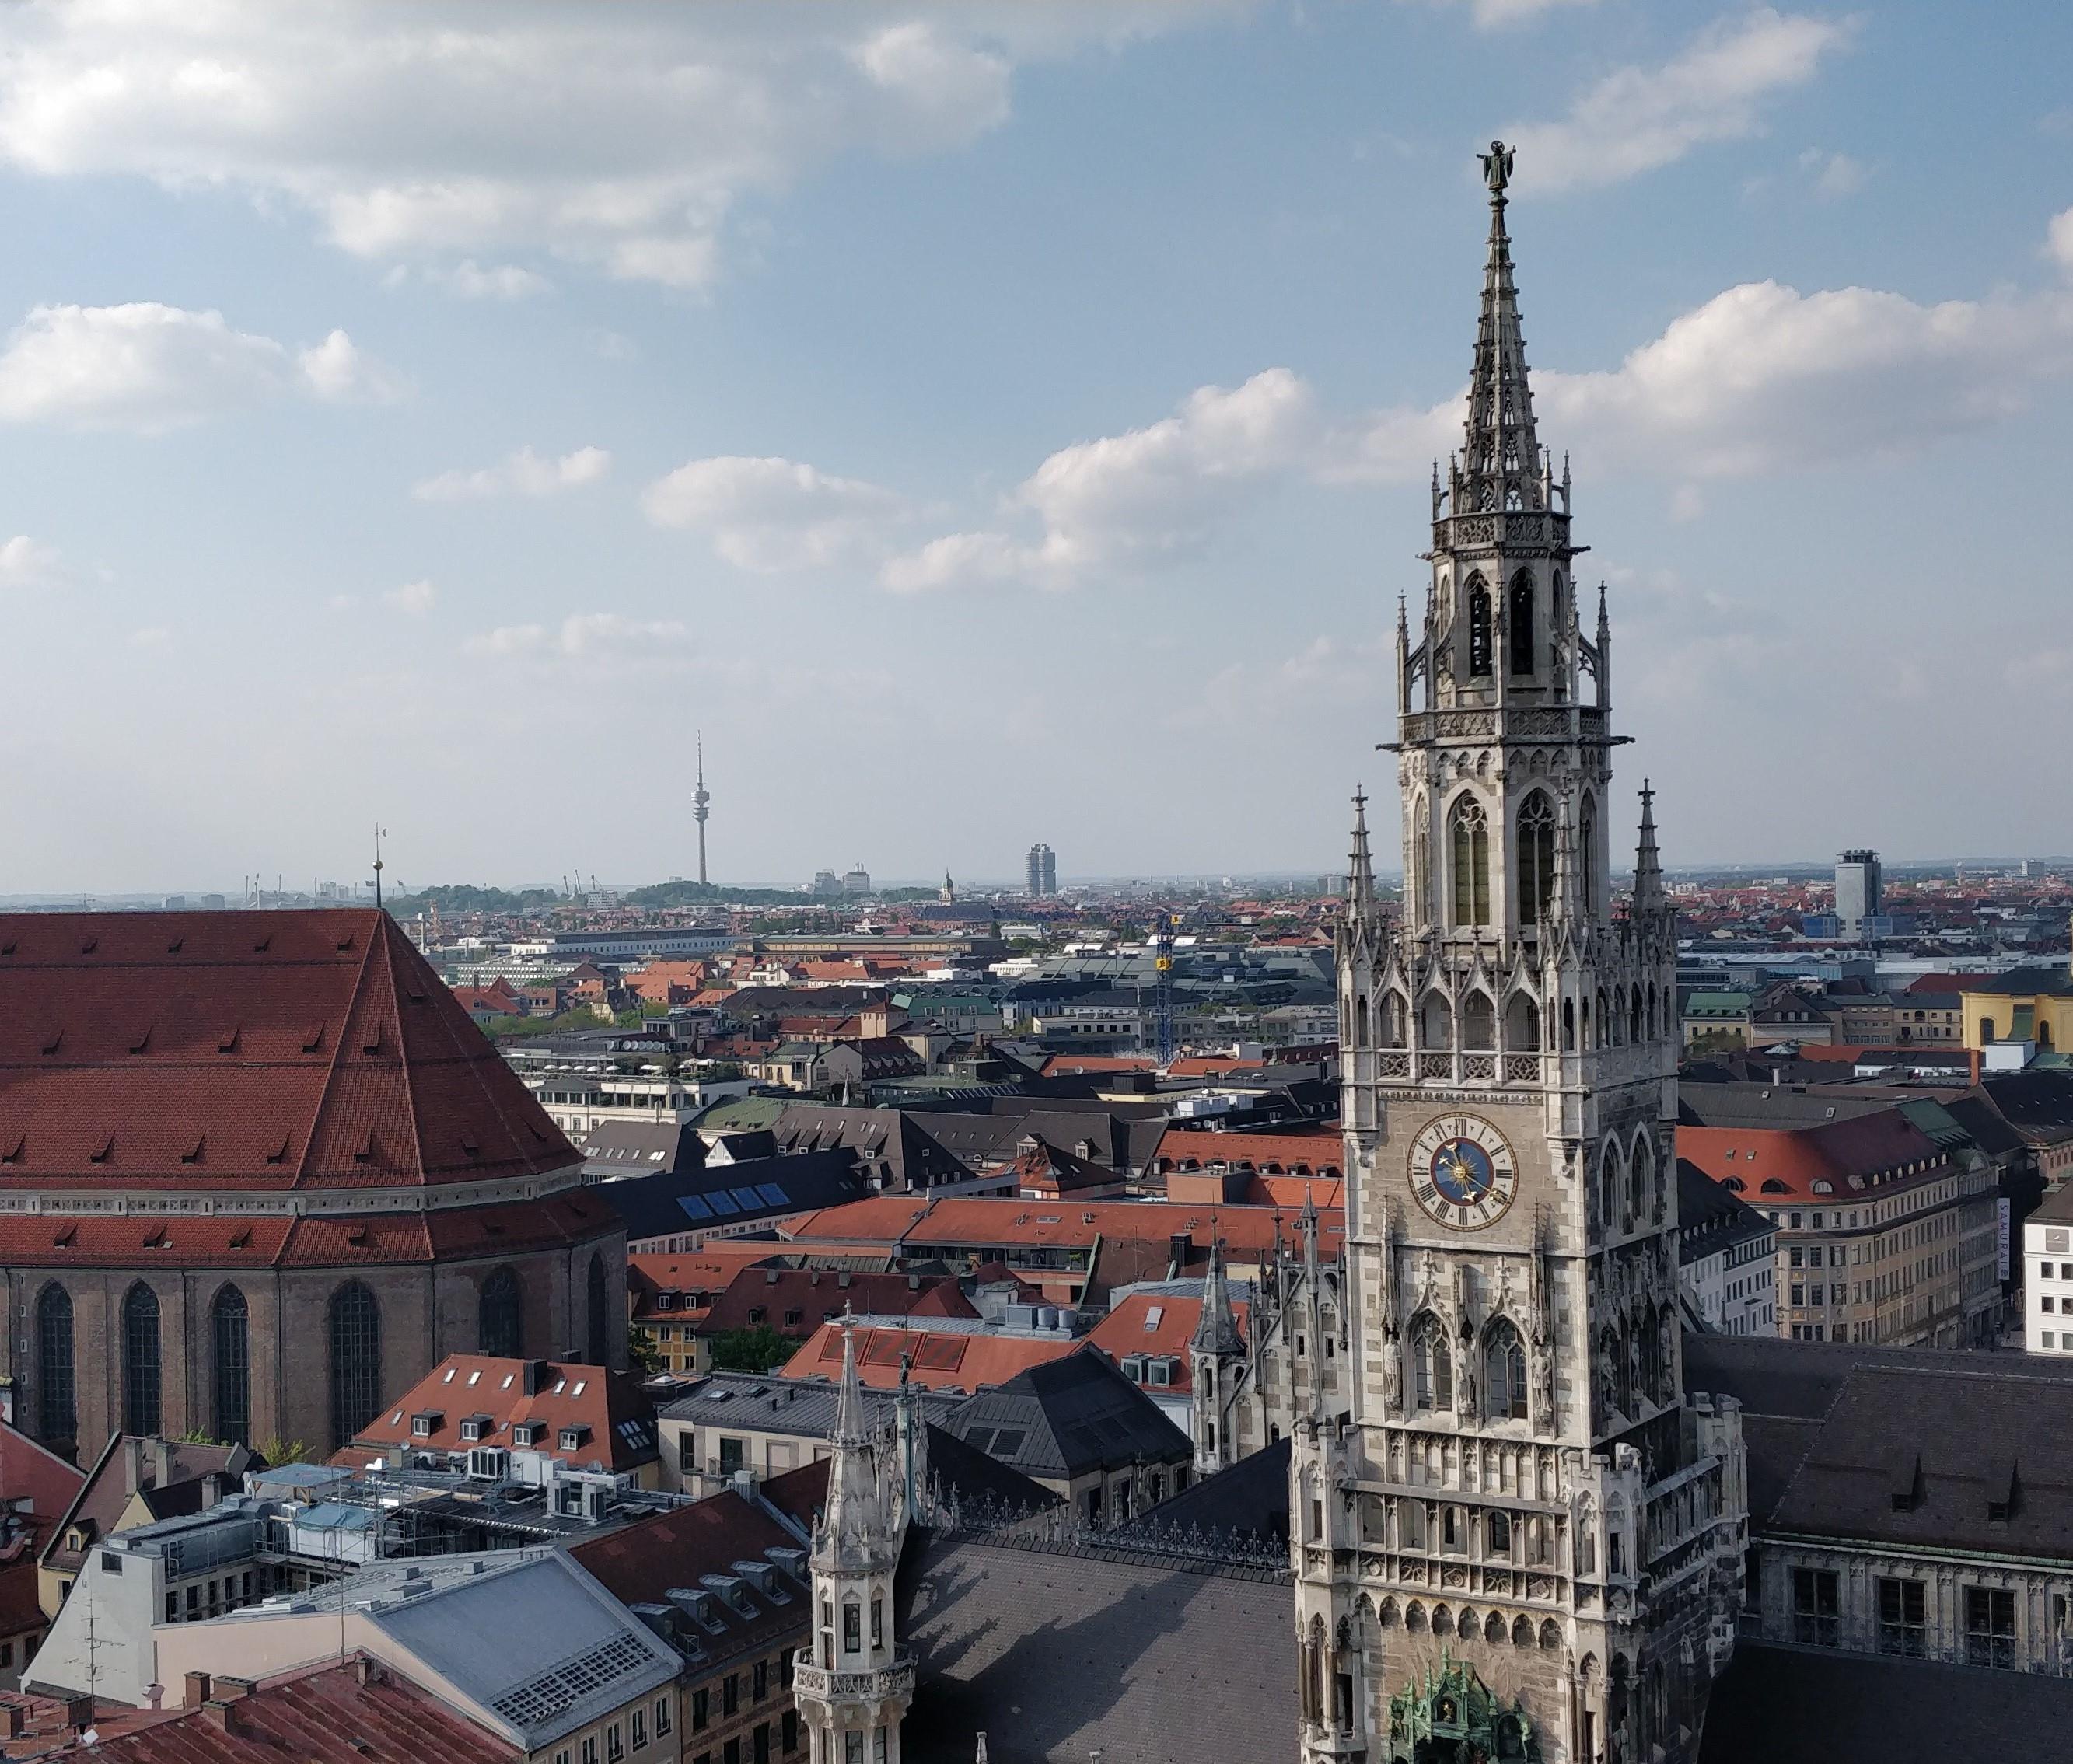 Free Tour of Munich's Old Town